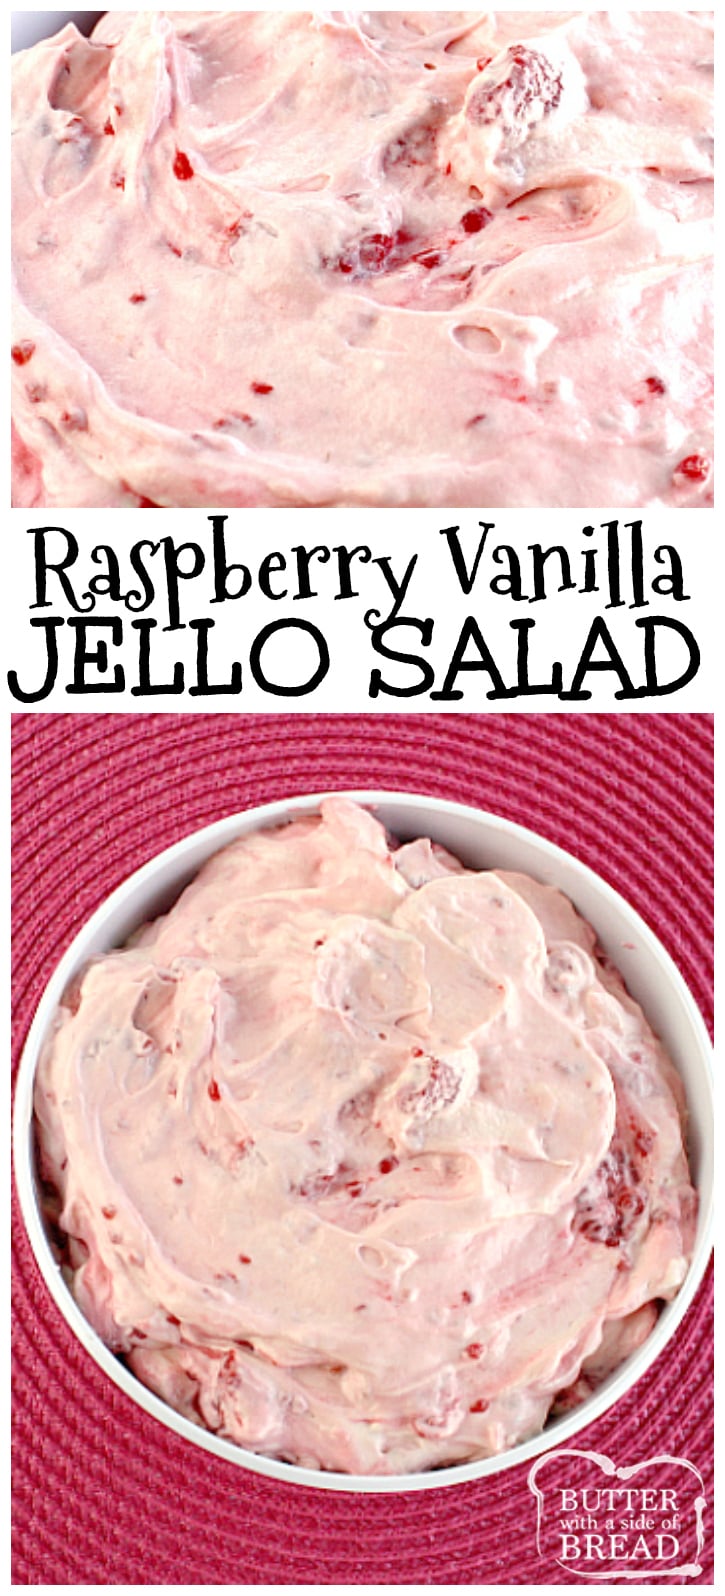 Super easy recipe for classic Raspberry Vanilla Jello Pudding Salad! Just 4 ingredients and takes only a few minutes to make. Raspberry Vanilla Jello Salad is one of the easiest recipes you will ever make and it's perfect as a side dish or even dessert! Butter With A Side of Bread